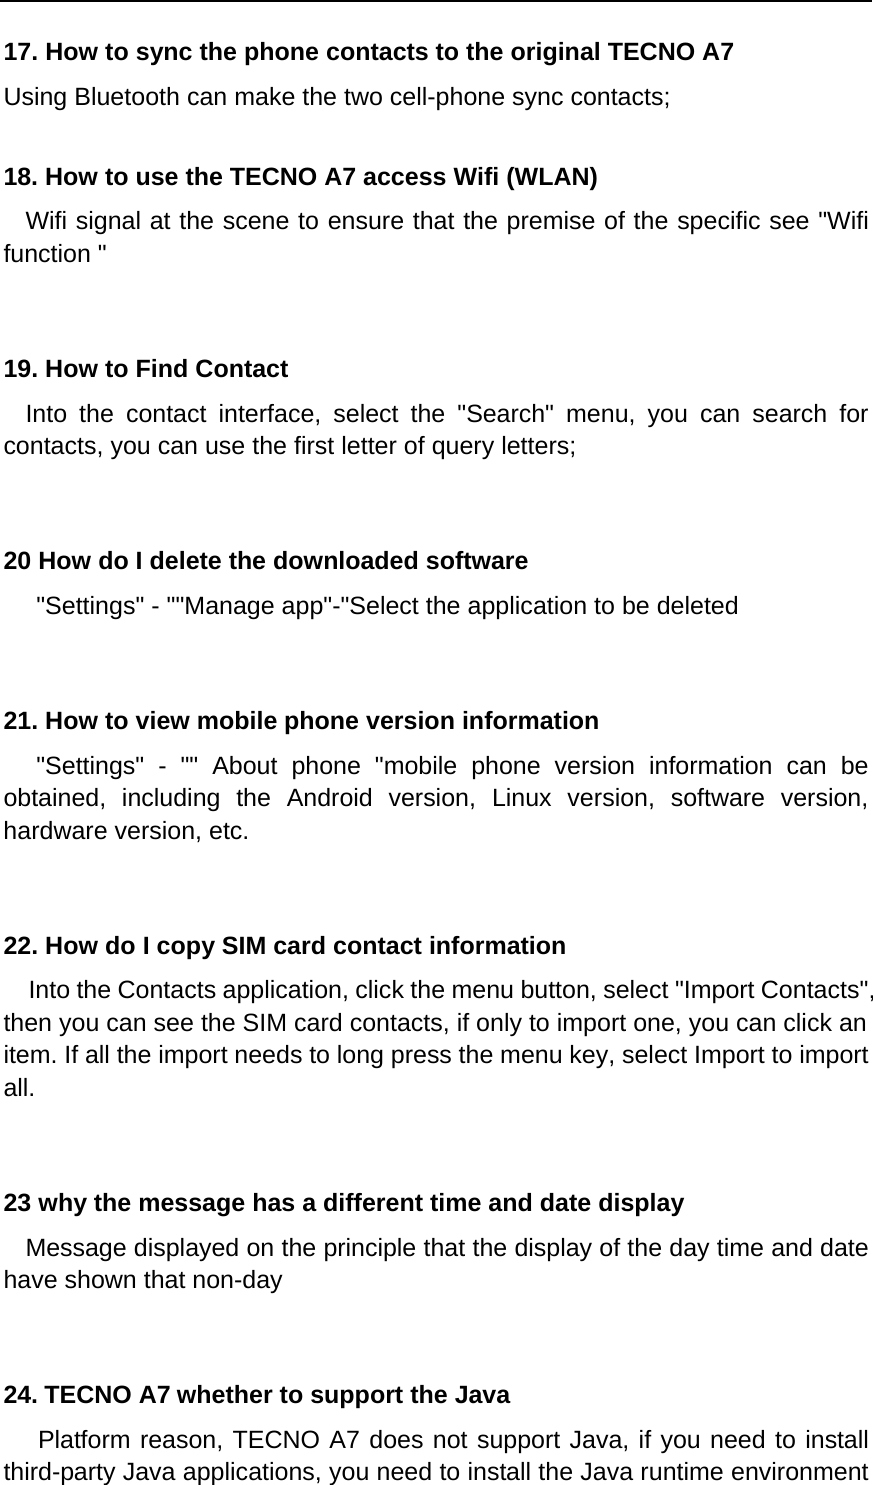  17. How to sync the phone contacts to the original TECNO A7 Using Bluetooth can make the two cell-phone sync contacts;  18. How to use the TECNO A7 access Wifi (WLAN)   Wifi signal at the scene to ensure that the premise of the specific see &quot;Wifi function &quot;   19. How to Find Contact   Into the contact interface, select the &quot;Search&quot; menu, you can search for contacts, you can use the first letter of query letters;   20 How do I delete the downloaded software    &quot;Settings&quot; - &quot;&quot;Manage app&quot;-&quot;Select the application to be deleted   21. How to view mobile phone version information    &quot;Settings&quot; - &quot;&quot; About phone &quot;mobile phone version information can be obtained, including the Android version, Linux version, software version, hardware version, etc.   22. How do I copy SIM card contact information Into the Contacts application, click the menu button, select &quot;Import Contacts&quot;, then you can see the SIM card contacts, if only to import one, you can click an item. If all the import needs to long press the menu key, select Import to import all.   23 why the message has a different time and date display   Message displayed on the principle that the display of the day time and date have shown that non-day   24. TECNO A7 whether to support the Java    Platform reason, TECNO A7 does not support Java, if you need to install third-party Java applications, you need to install the Java runtime environment 